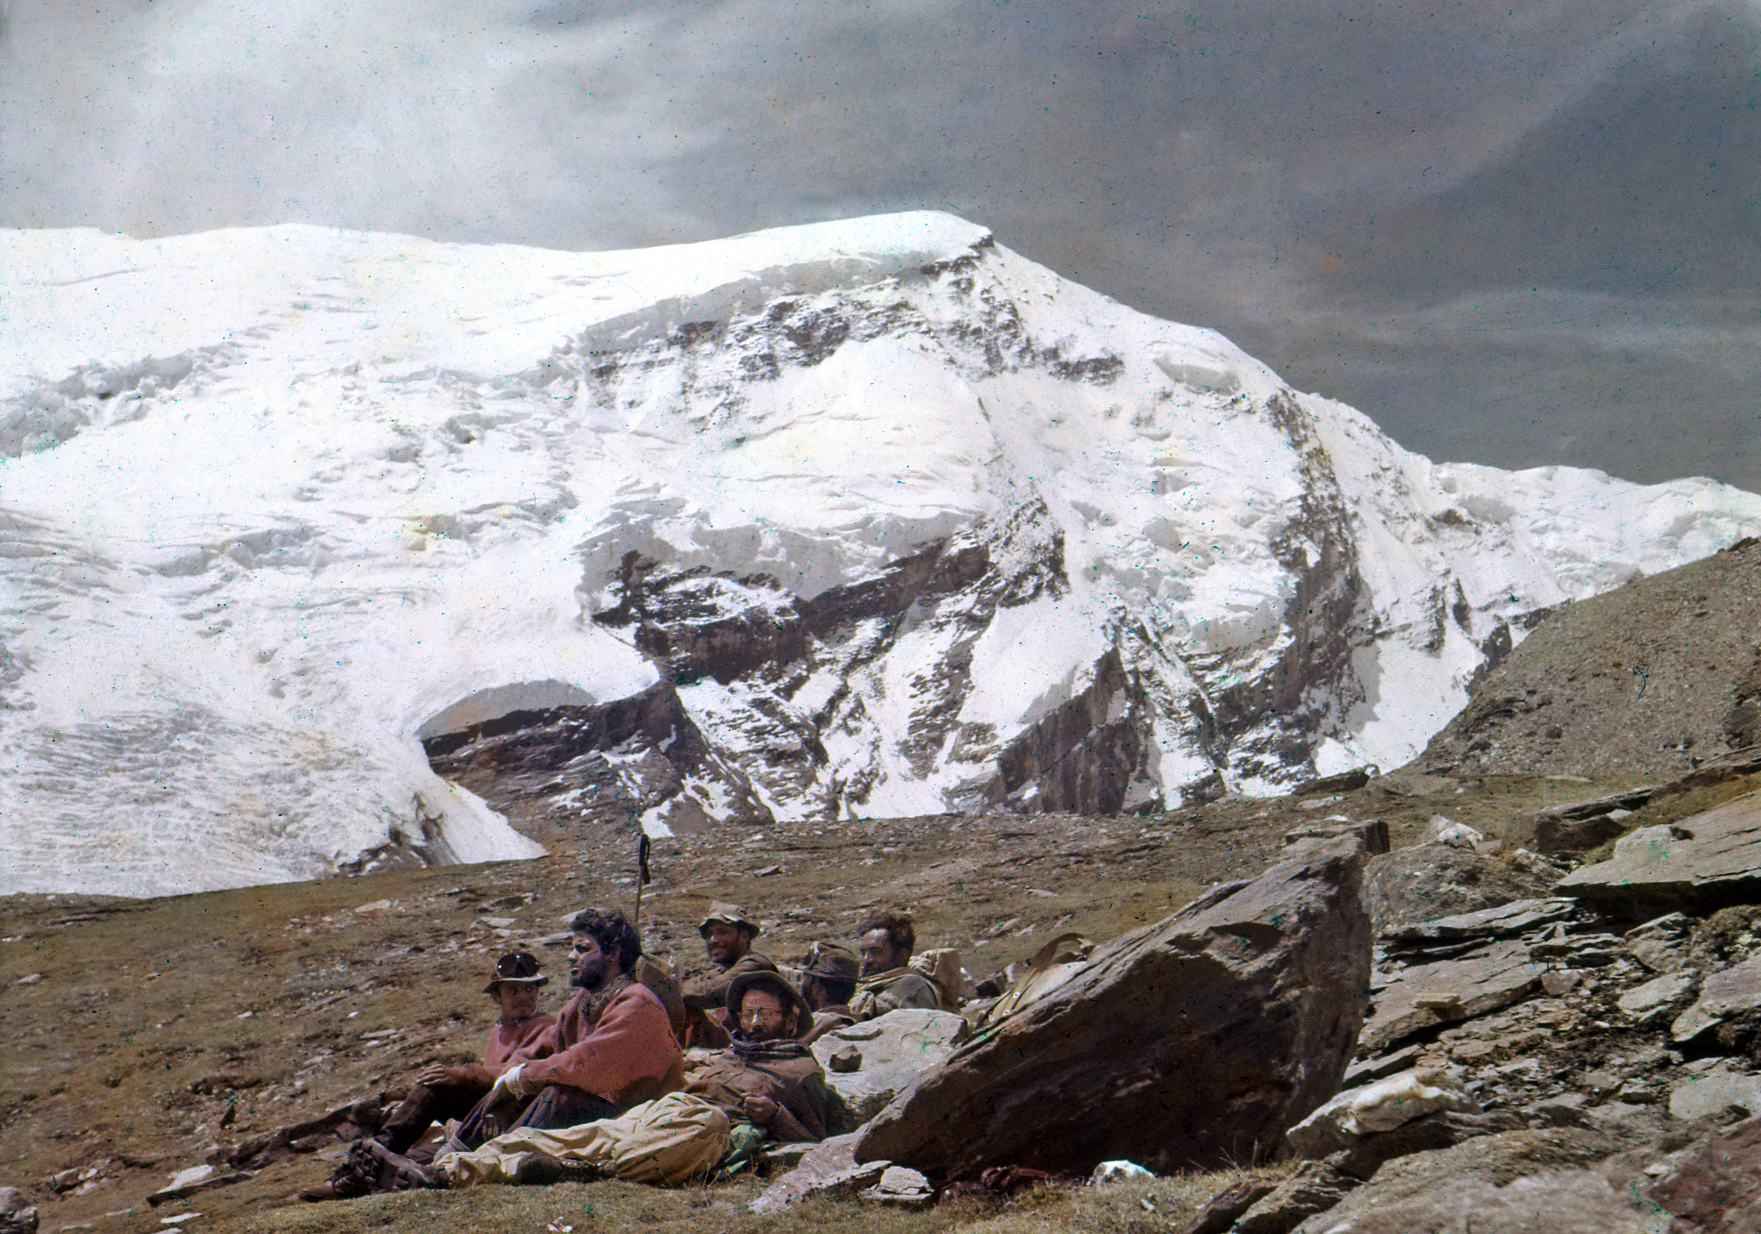 The 1961 expedition team with Mrigthuni (6855m) in the background. [Photo] Suman Dubey collection